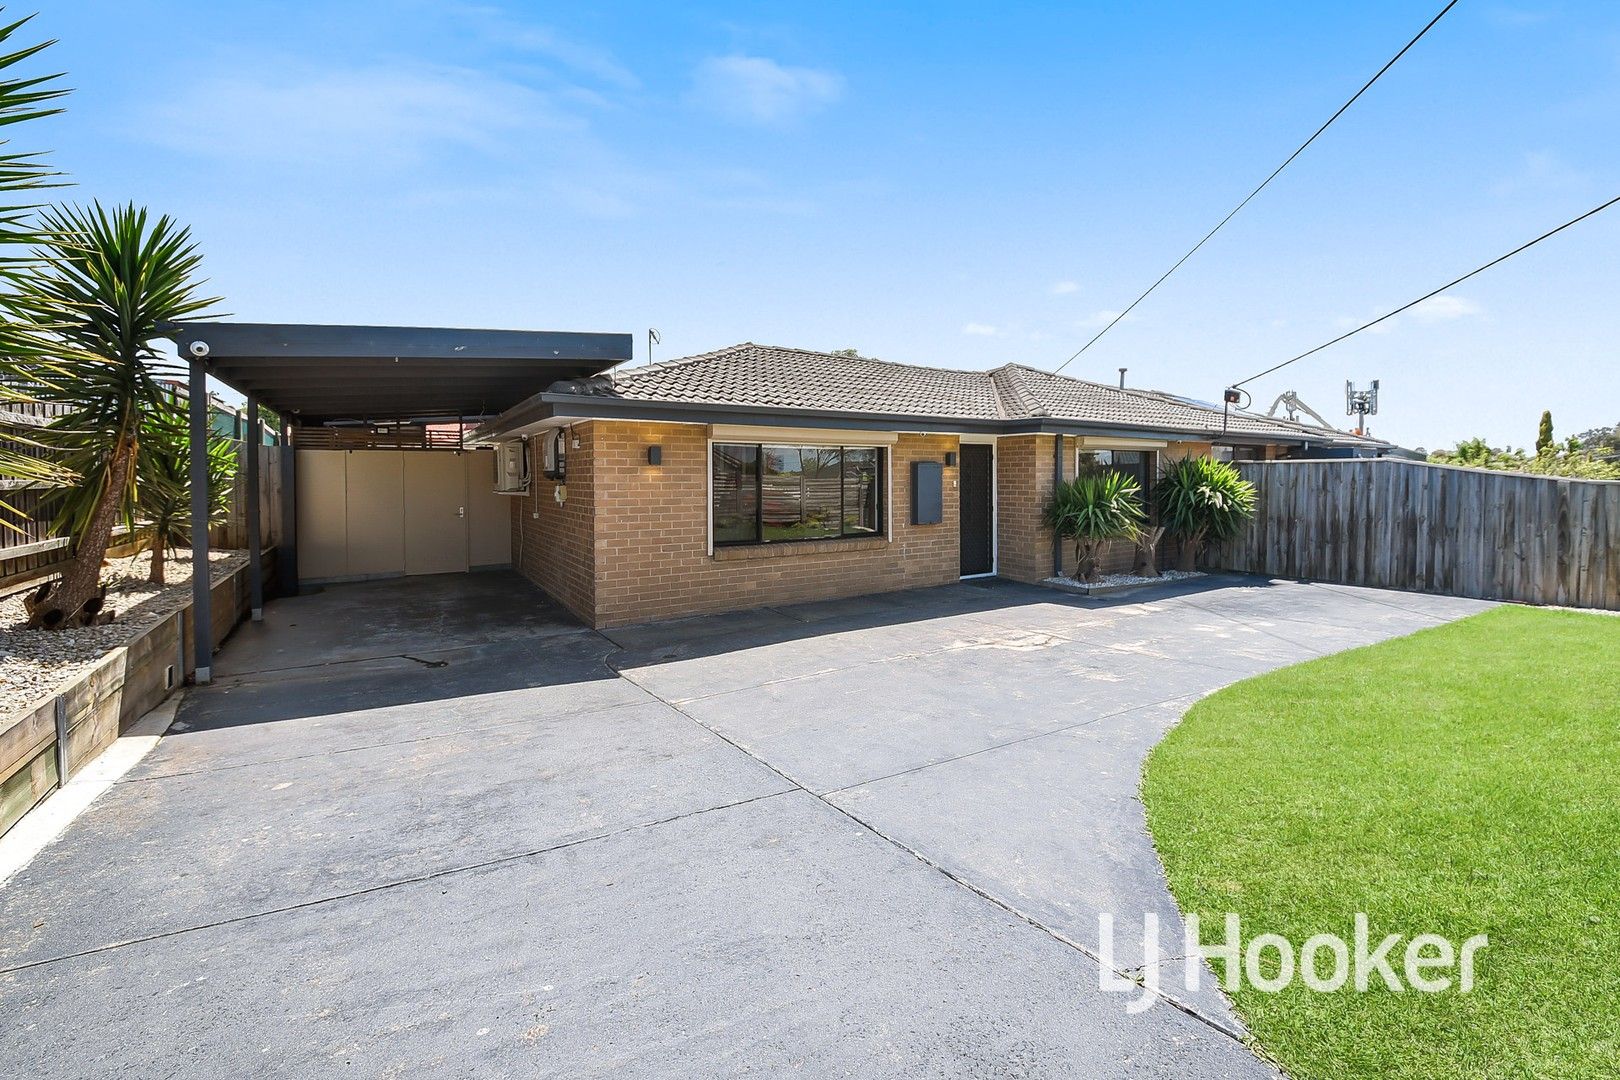 3 bedrooms Apartment / Unit / Flat in 1/50 Kidds Road DOVETON VIC, 3177